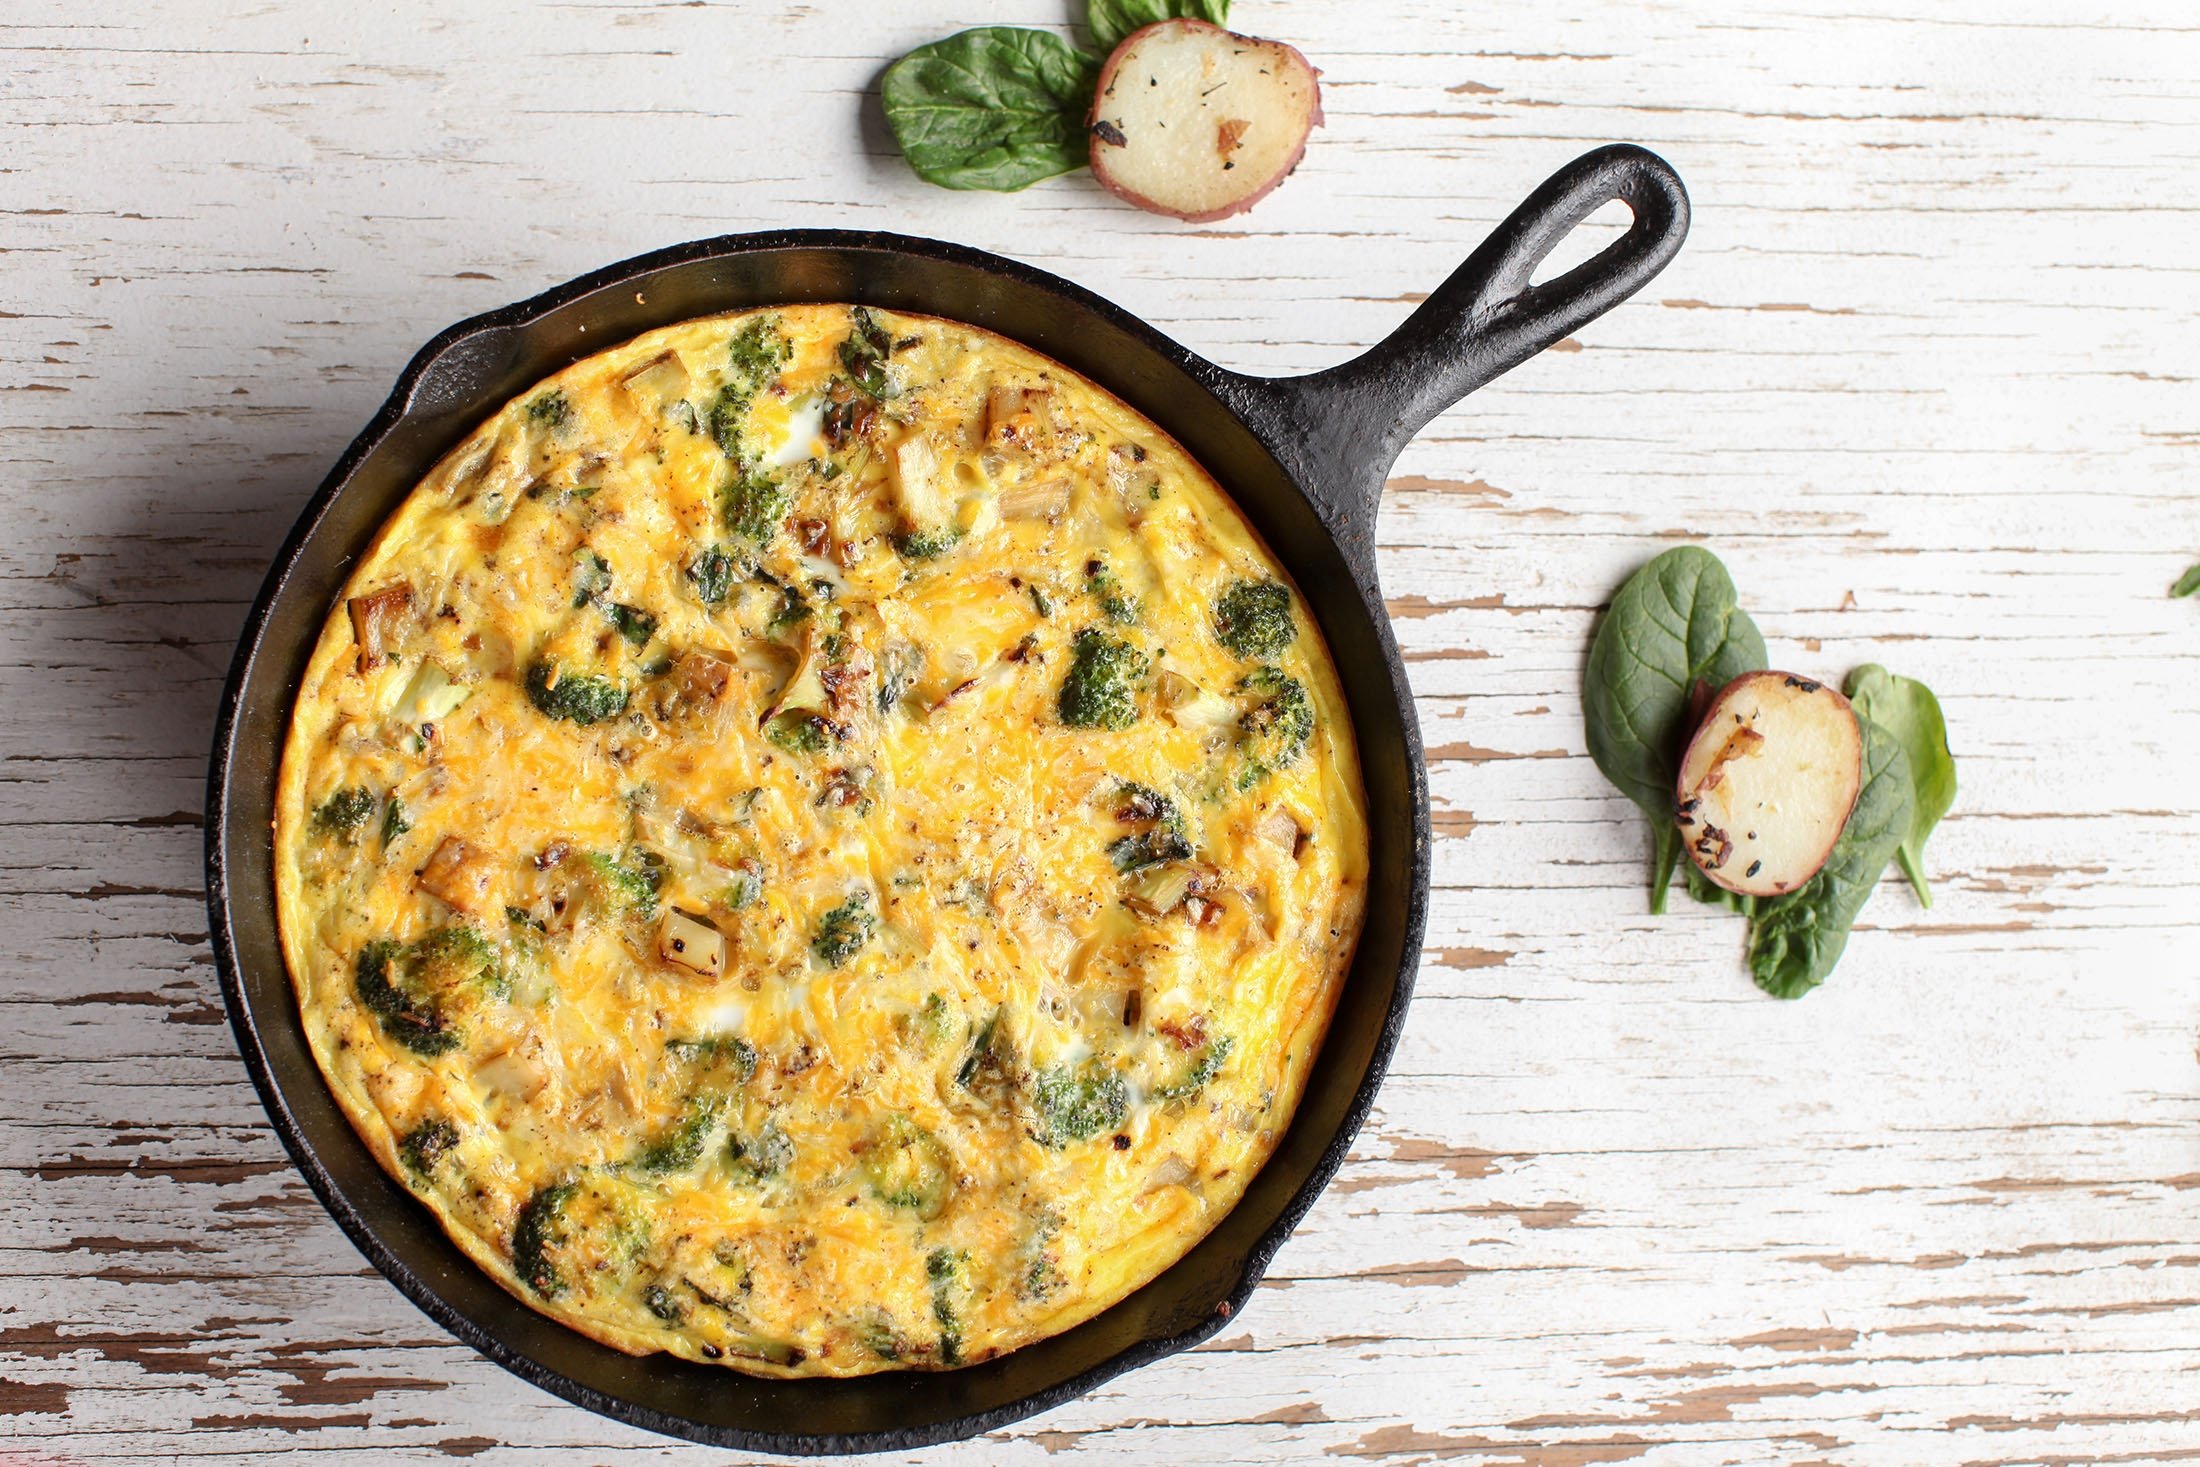 You can also use an iron skillet to make your breakfast frittata. (Shutterstock Photo)